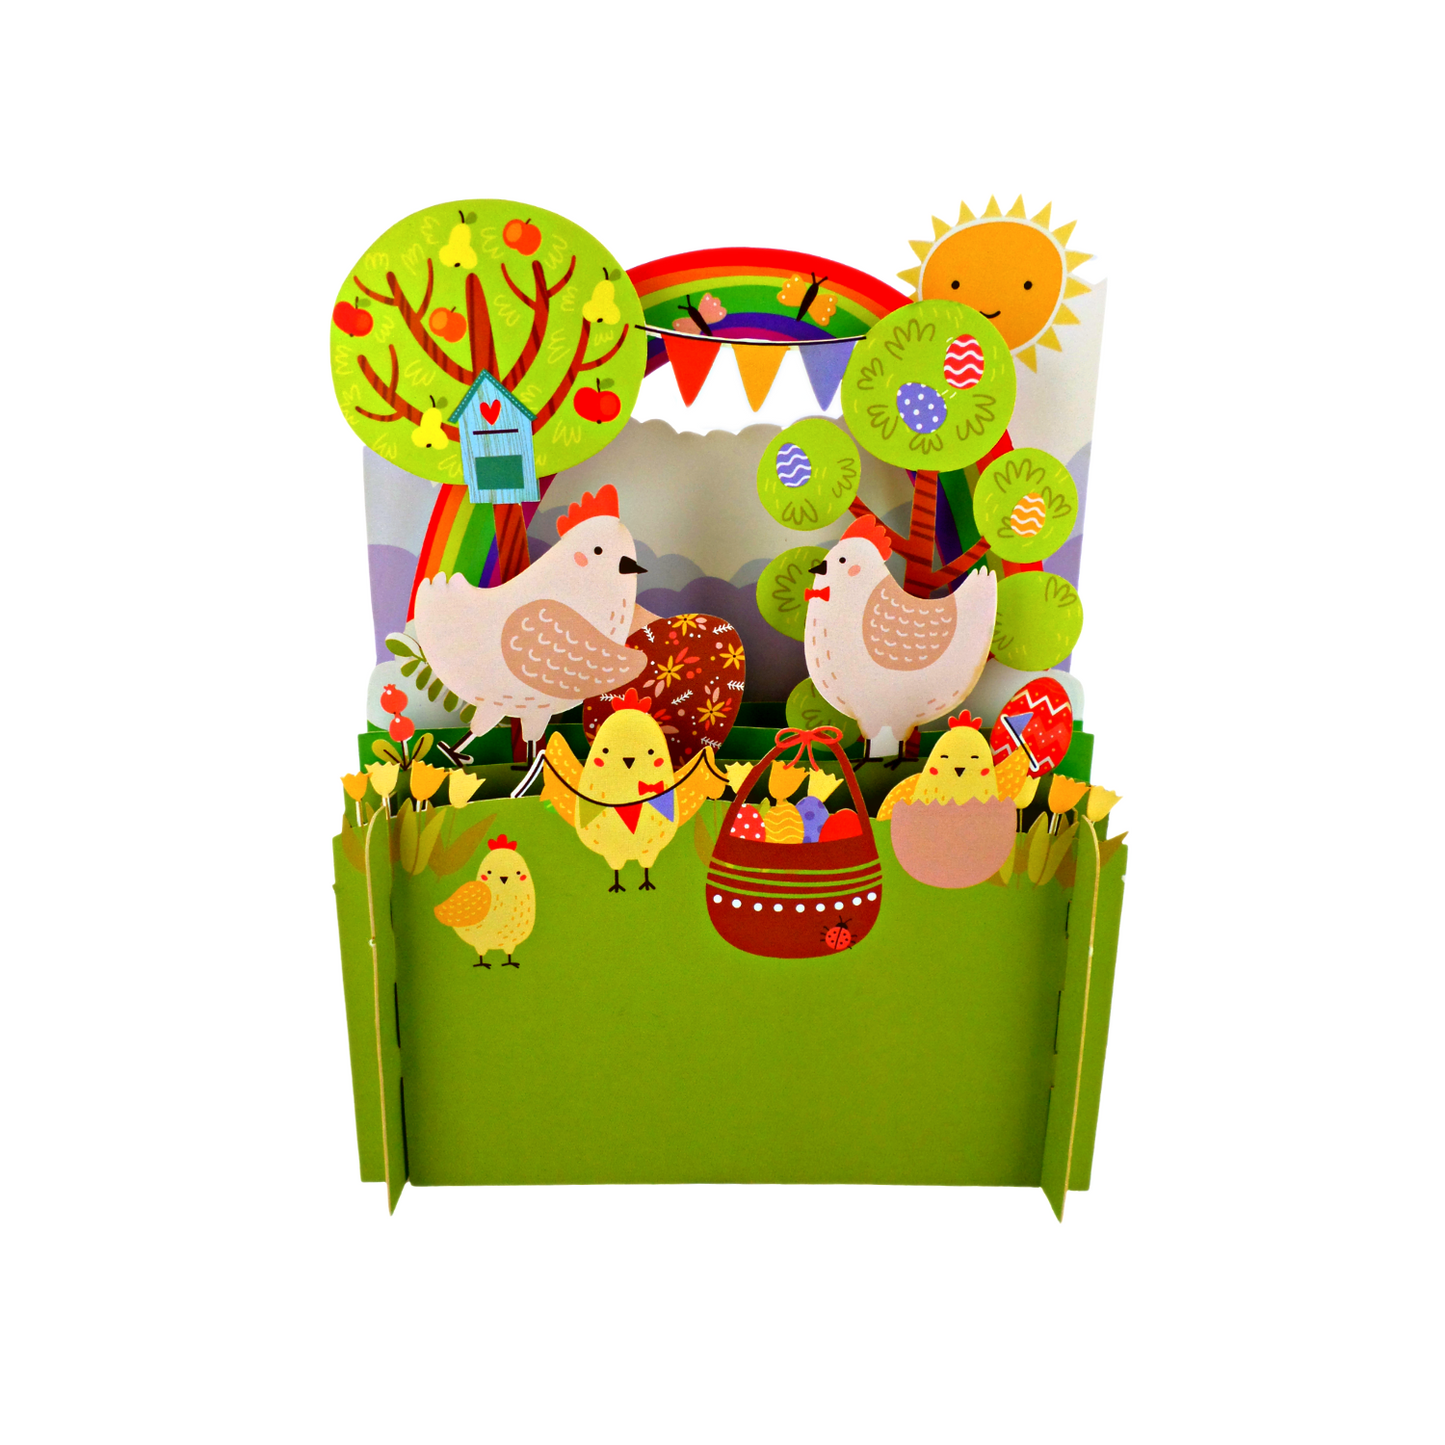 Fun Chick Party Easter Celebration 3D Pop Up Greeting Card